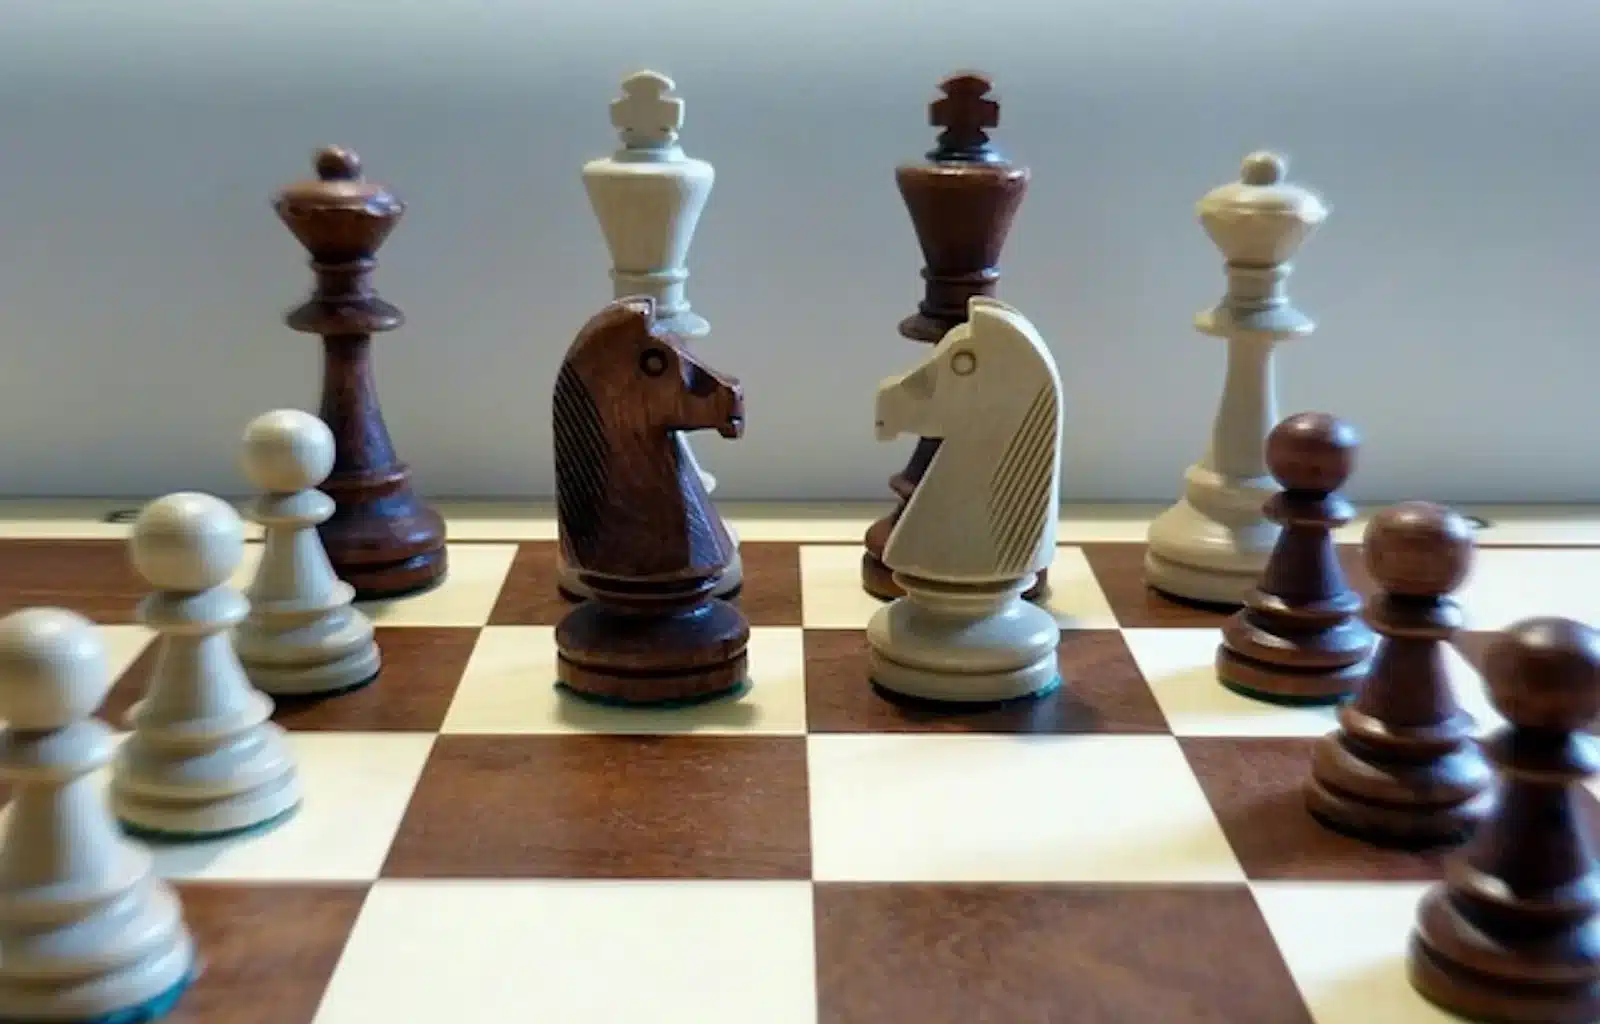 Chess pieces arranged on a chess board, waiting for the next move to be made.